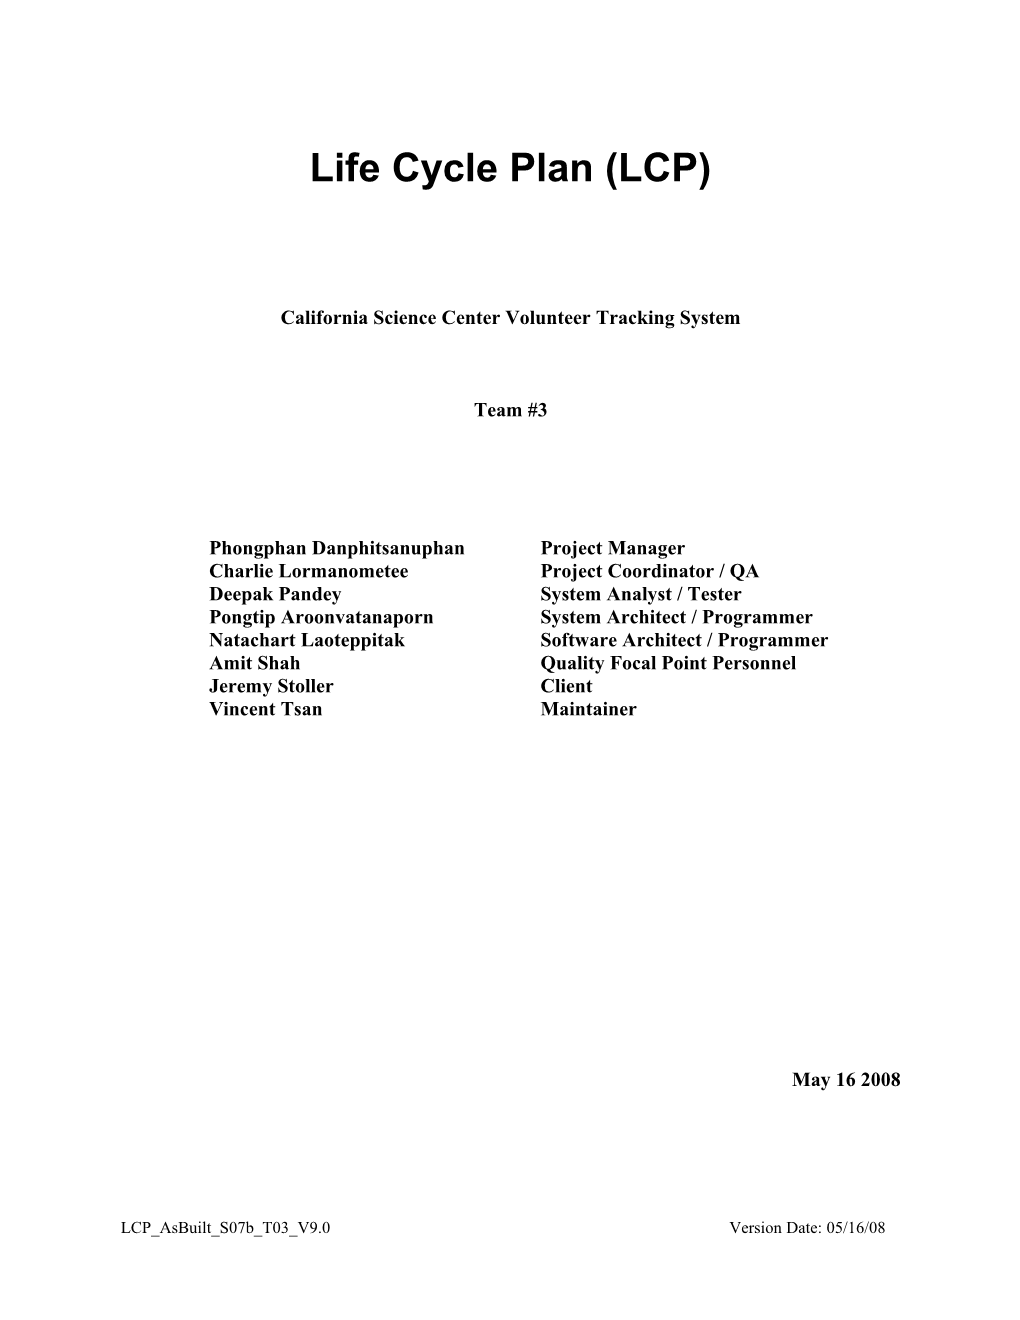 Life Cycle Plan (LCP) s6